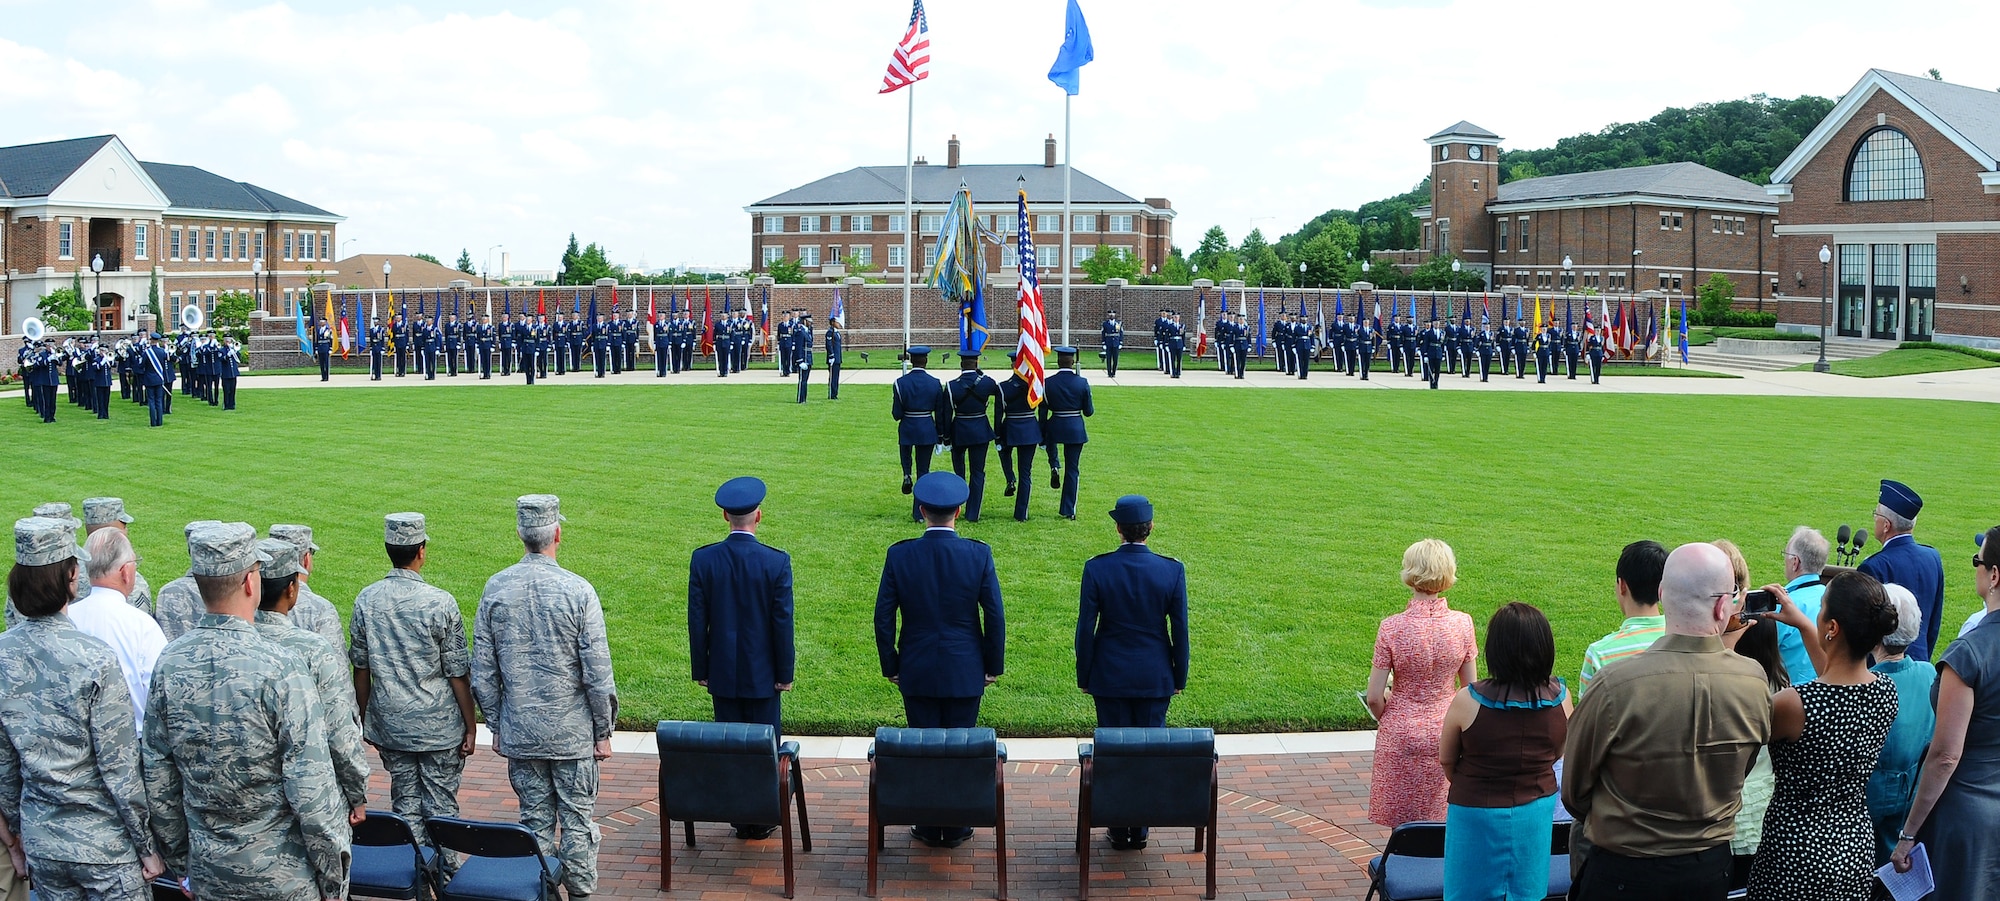 The colors are presented during a pass in review for the Air Force Honor Guard change-of-command ceremony June 23 on the U.S. Air Force Ceremonial Lawn, Bolling Air Force Base, D.C. These ceremonies represent the formal passing of responsibility, authority and accountability of command from one officer to another. (U.S. Air Force photo by Senior Airman Alex Montes)